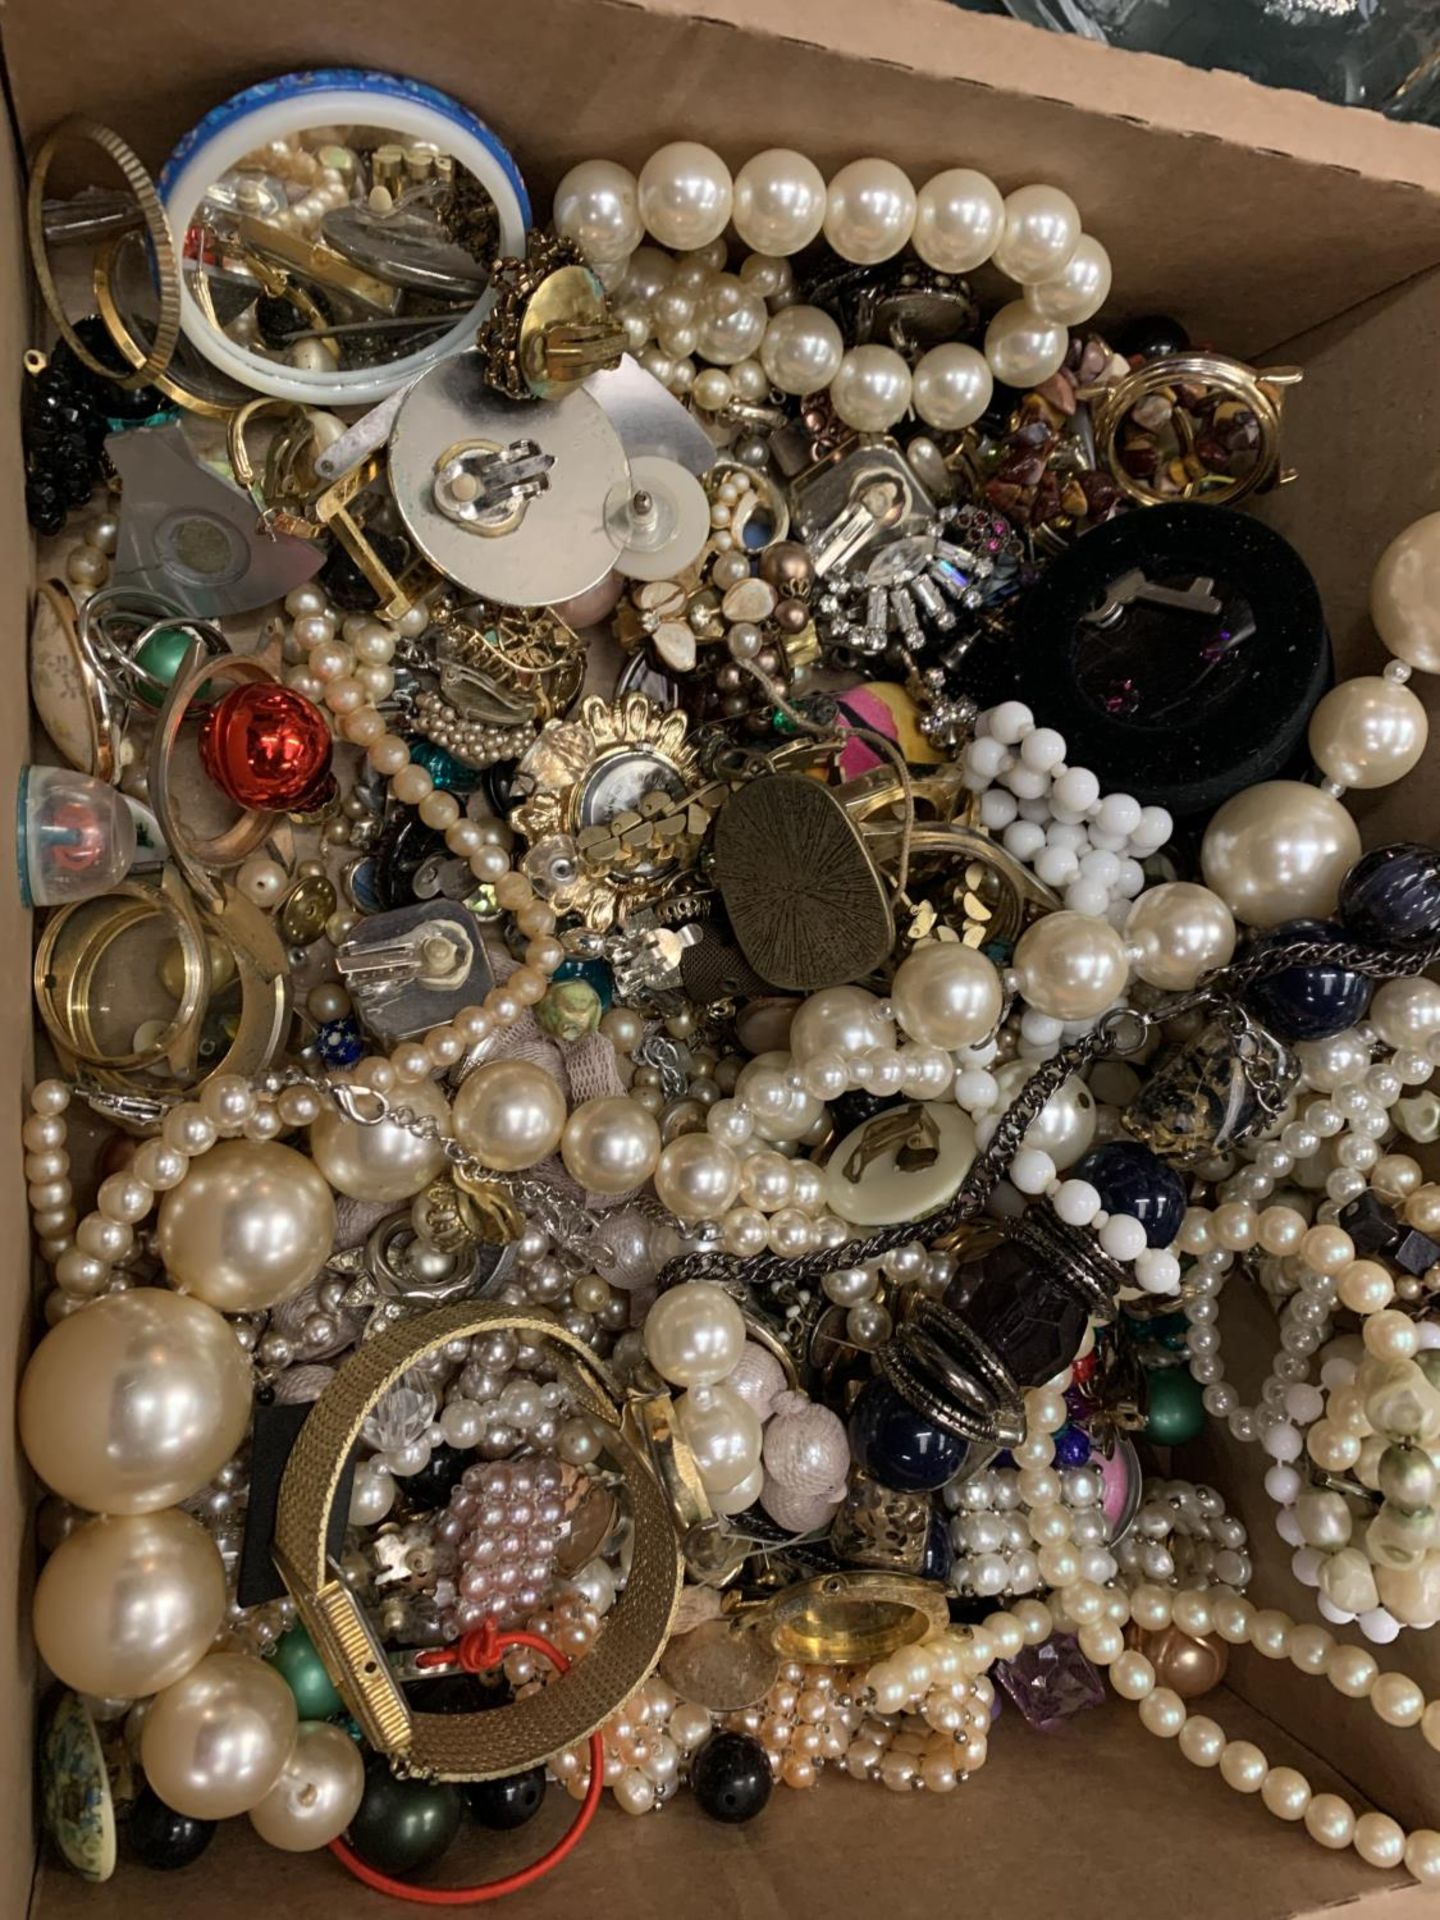 A BOX OF COSTUME JEWELLERY TO INCLUDE BANGLES, WATCHES, EARRINGS, BEADS, ETC - Image 2 of 2